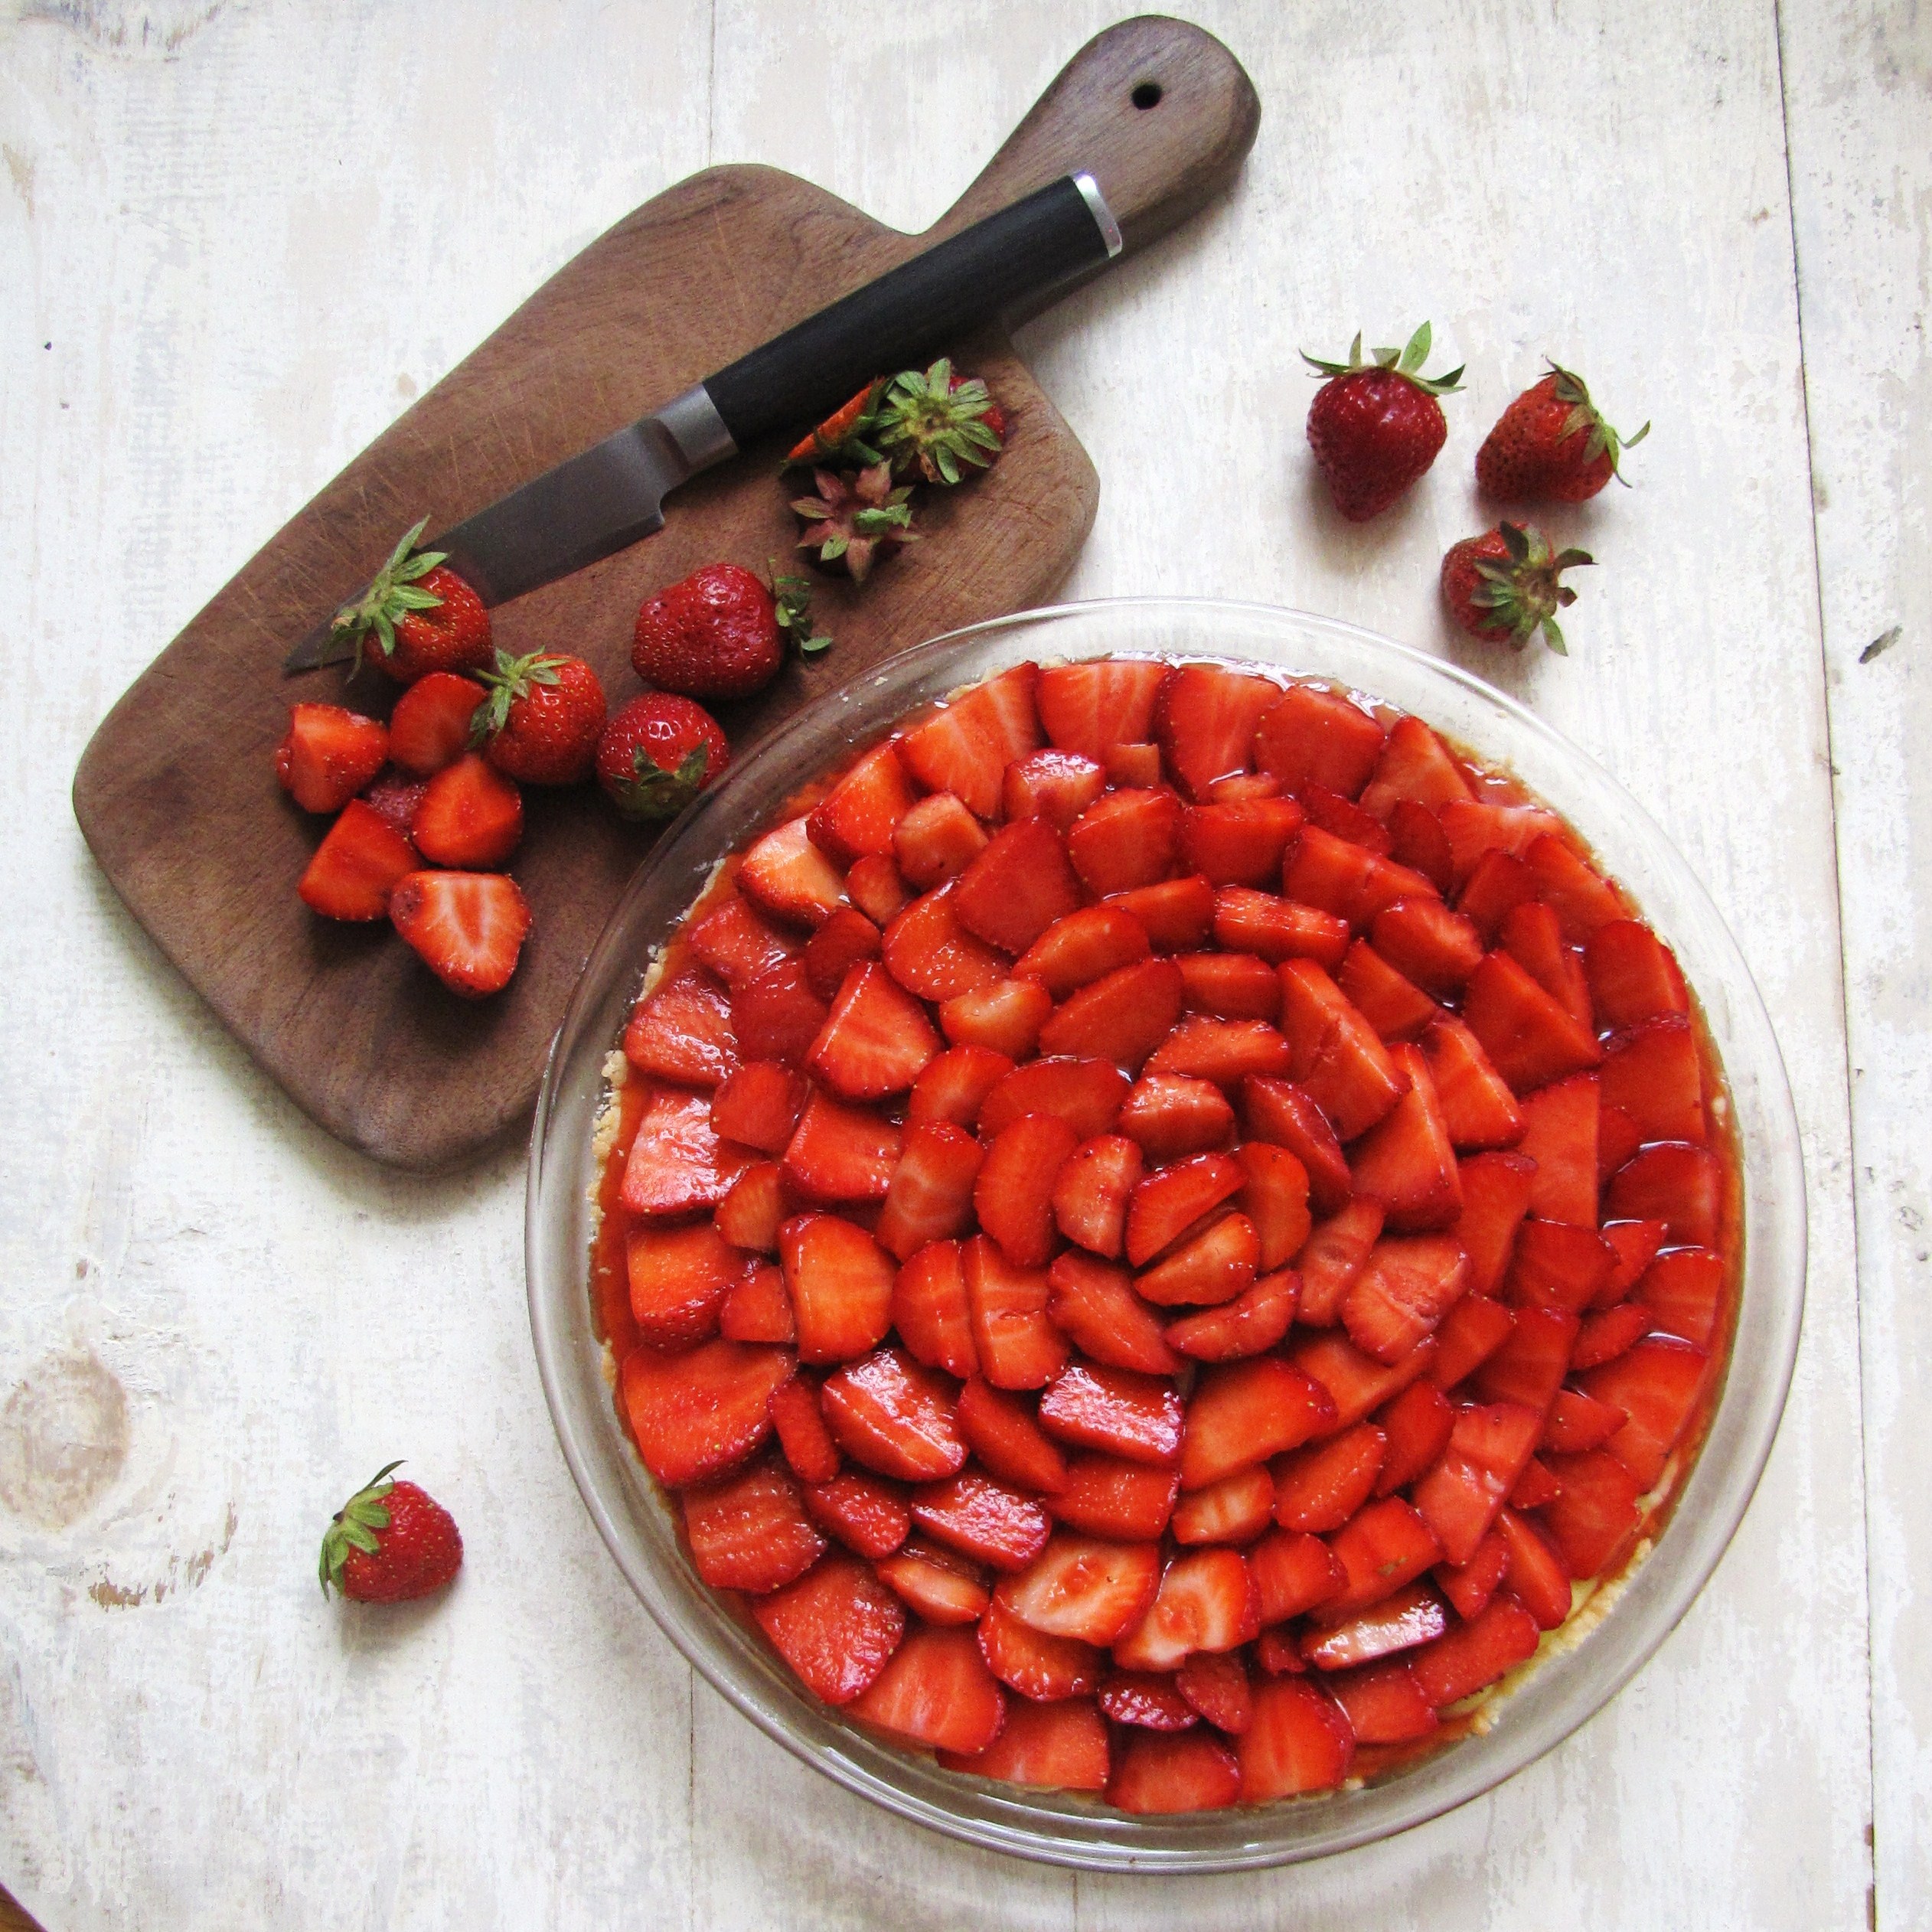 13 Recipes for Spring - Strawberry Almond Cream Tart {Katie at the Kitchen Door}